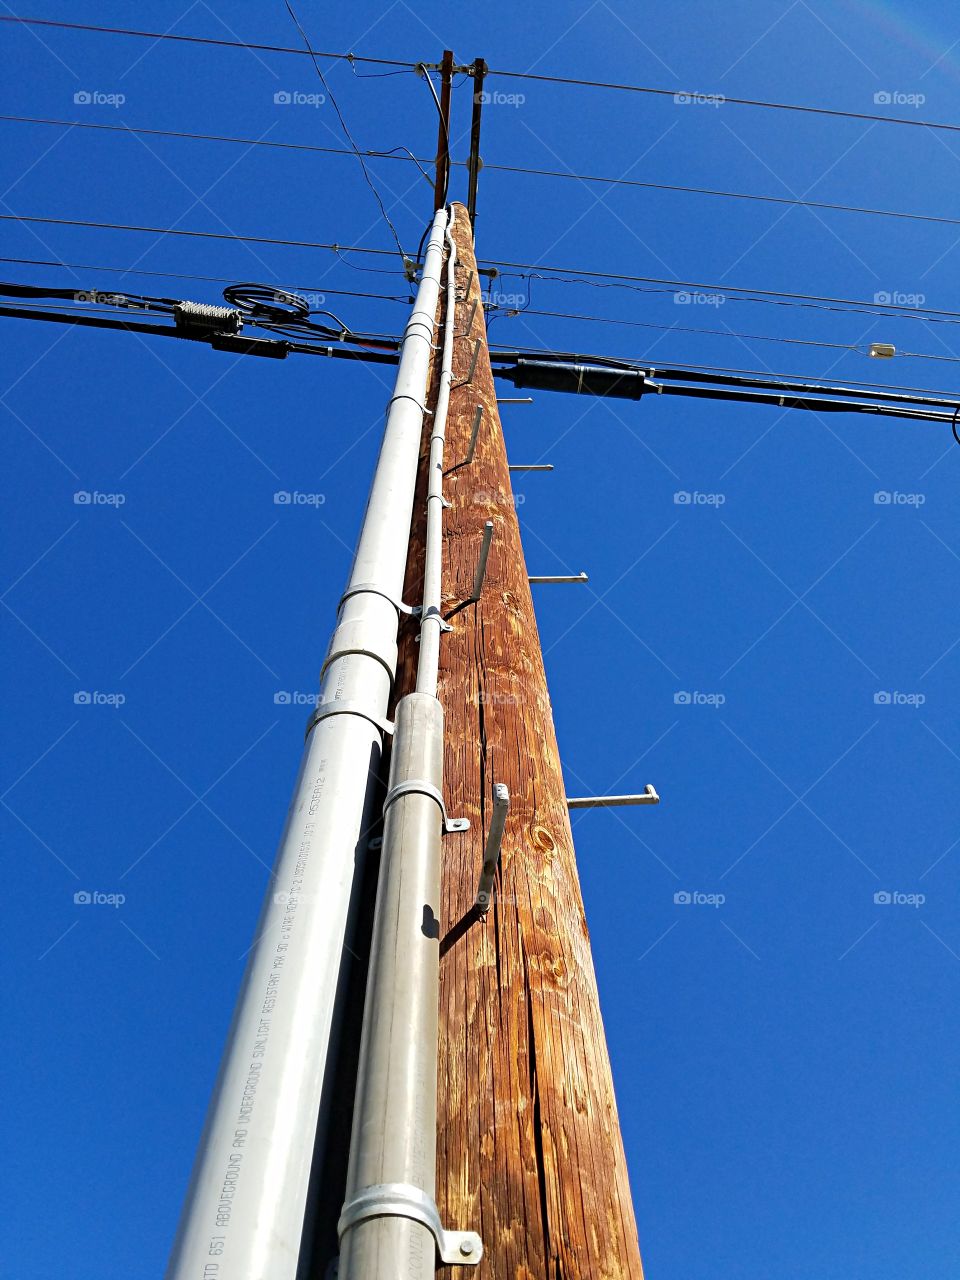 Power pole with metal steps going up!